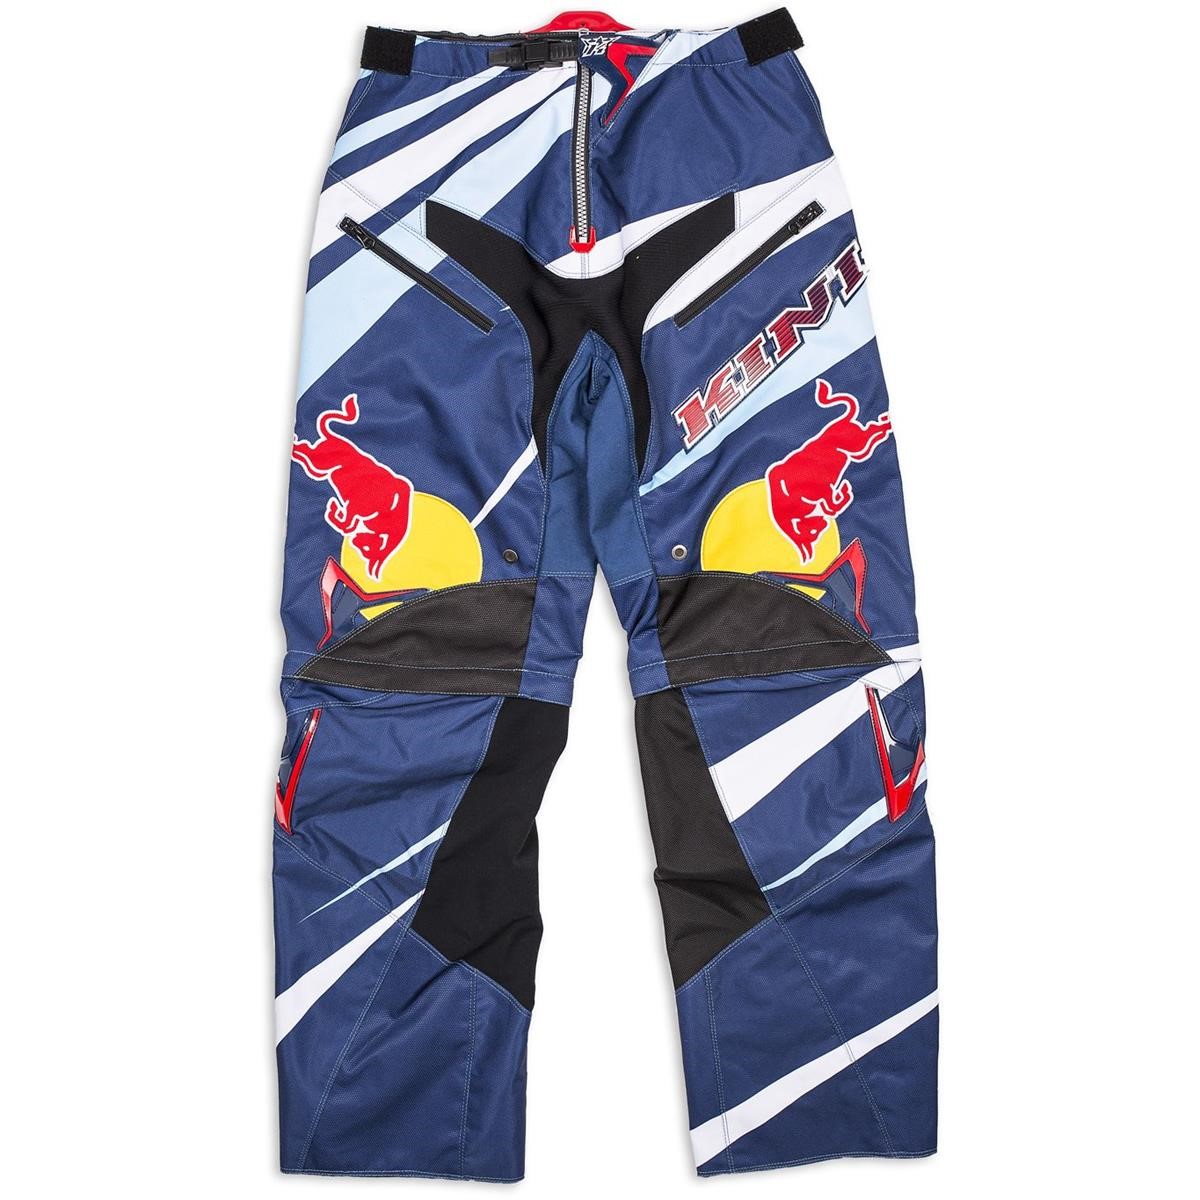 Kini Red Bull Baggy Cross Hose Competition White/Blue